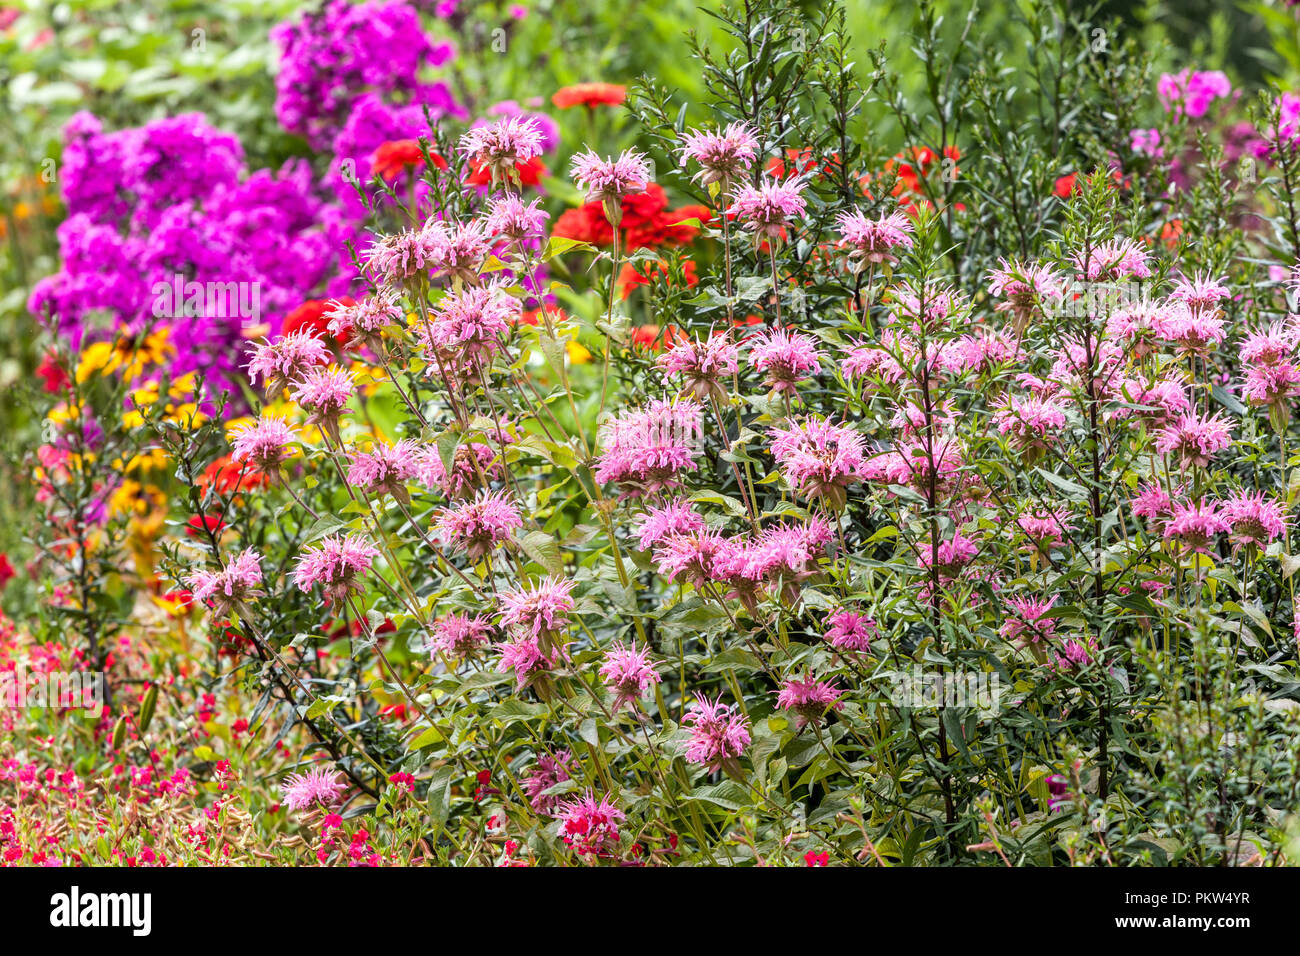 A colorful combination of a summer flower bed in a cottage flowers garden border, Monarda, phlox purple garden Pink flowers in July Stock Photo